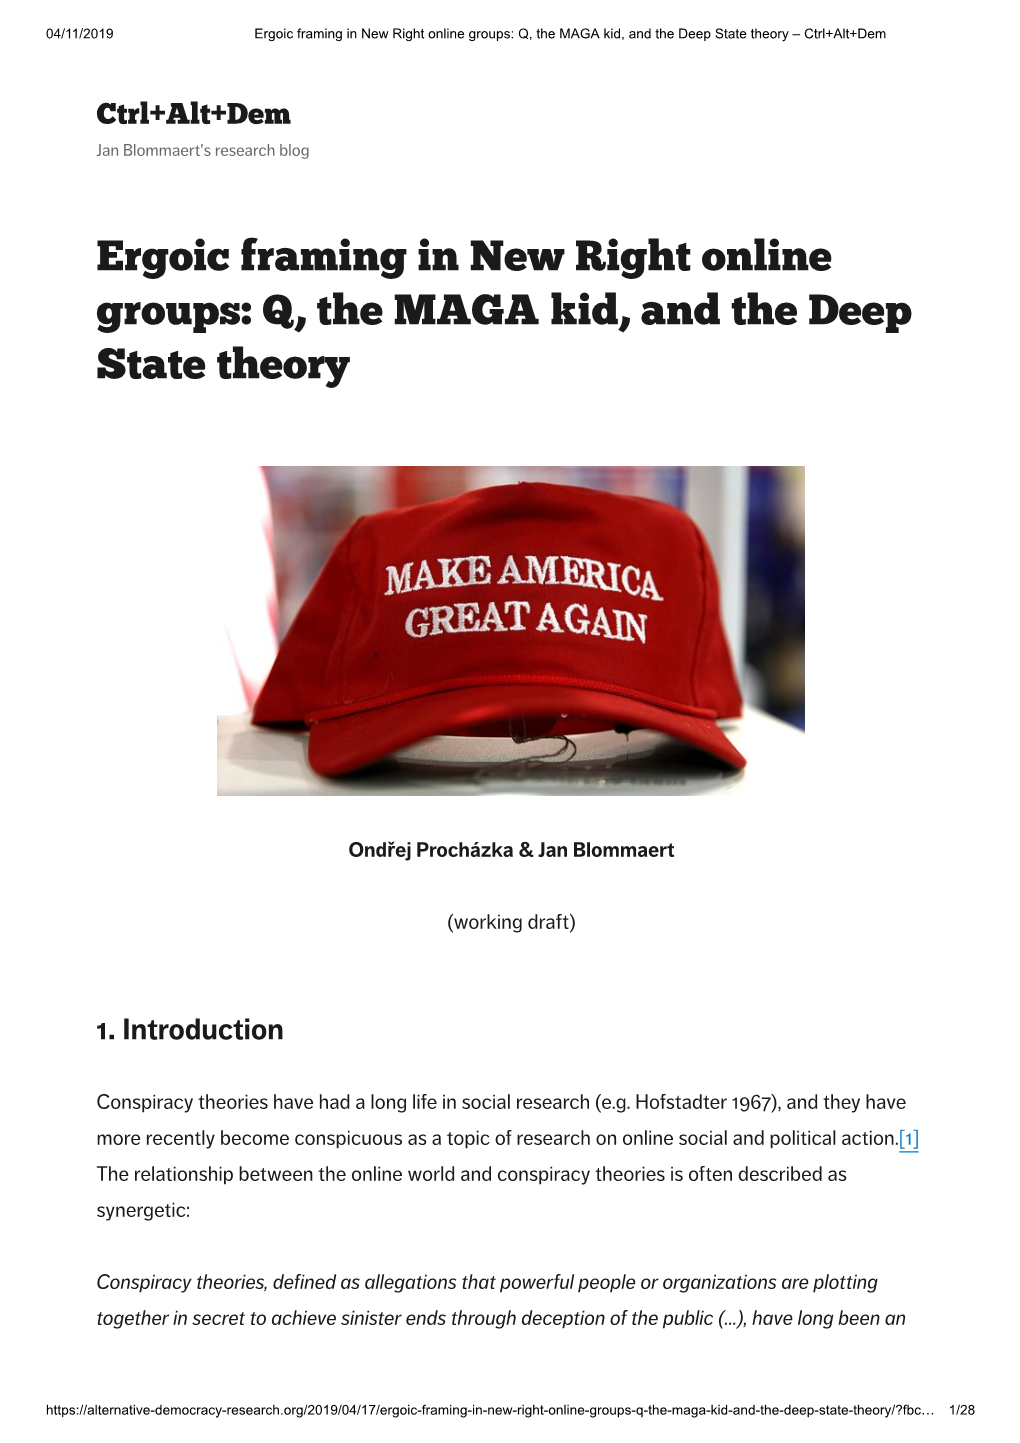 Ergoic Framing in New Right Online Groups: Q, the MAGA Kid, and the Deep State Theory – Ctrl+Alt+Dem